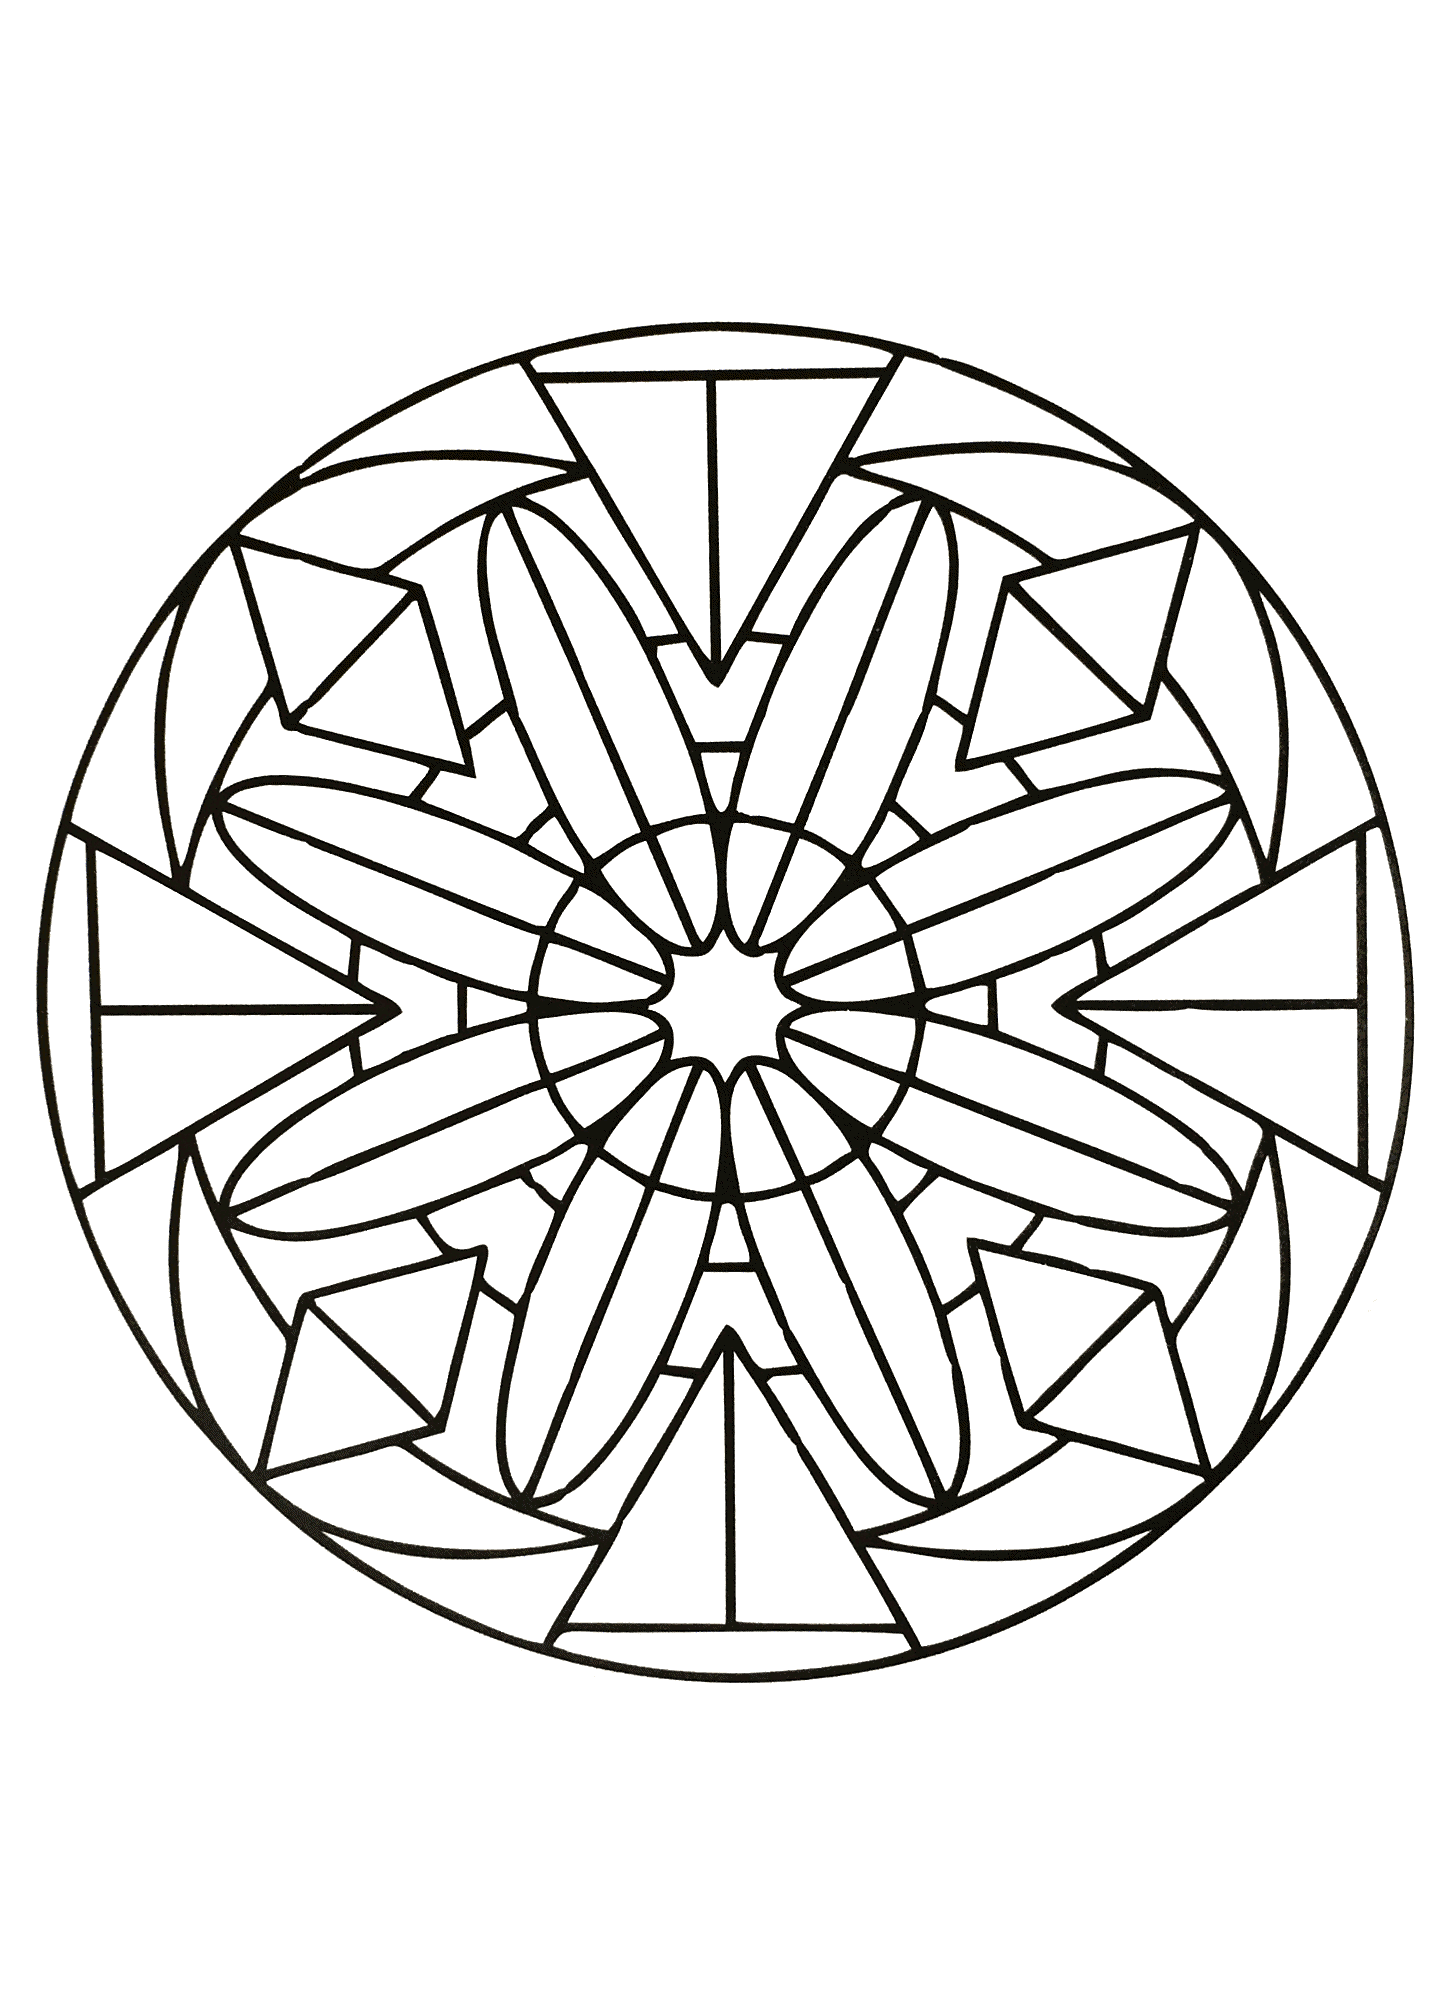 Mandalas free to color for children - Mandalas Kids Coloring Pages